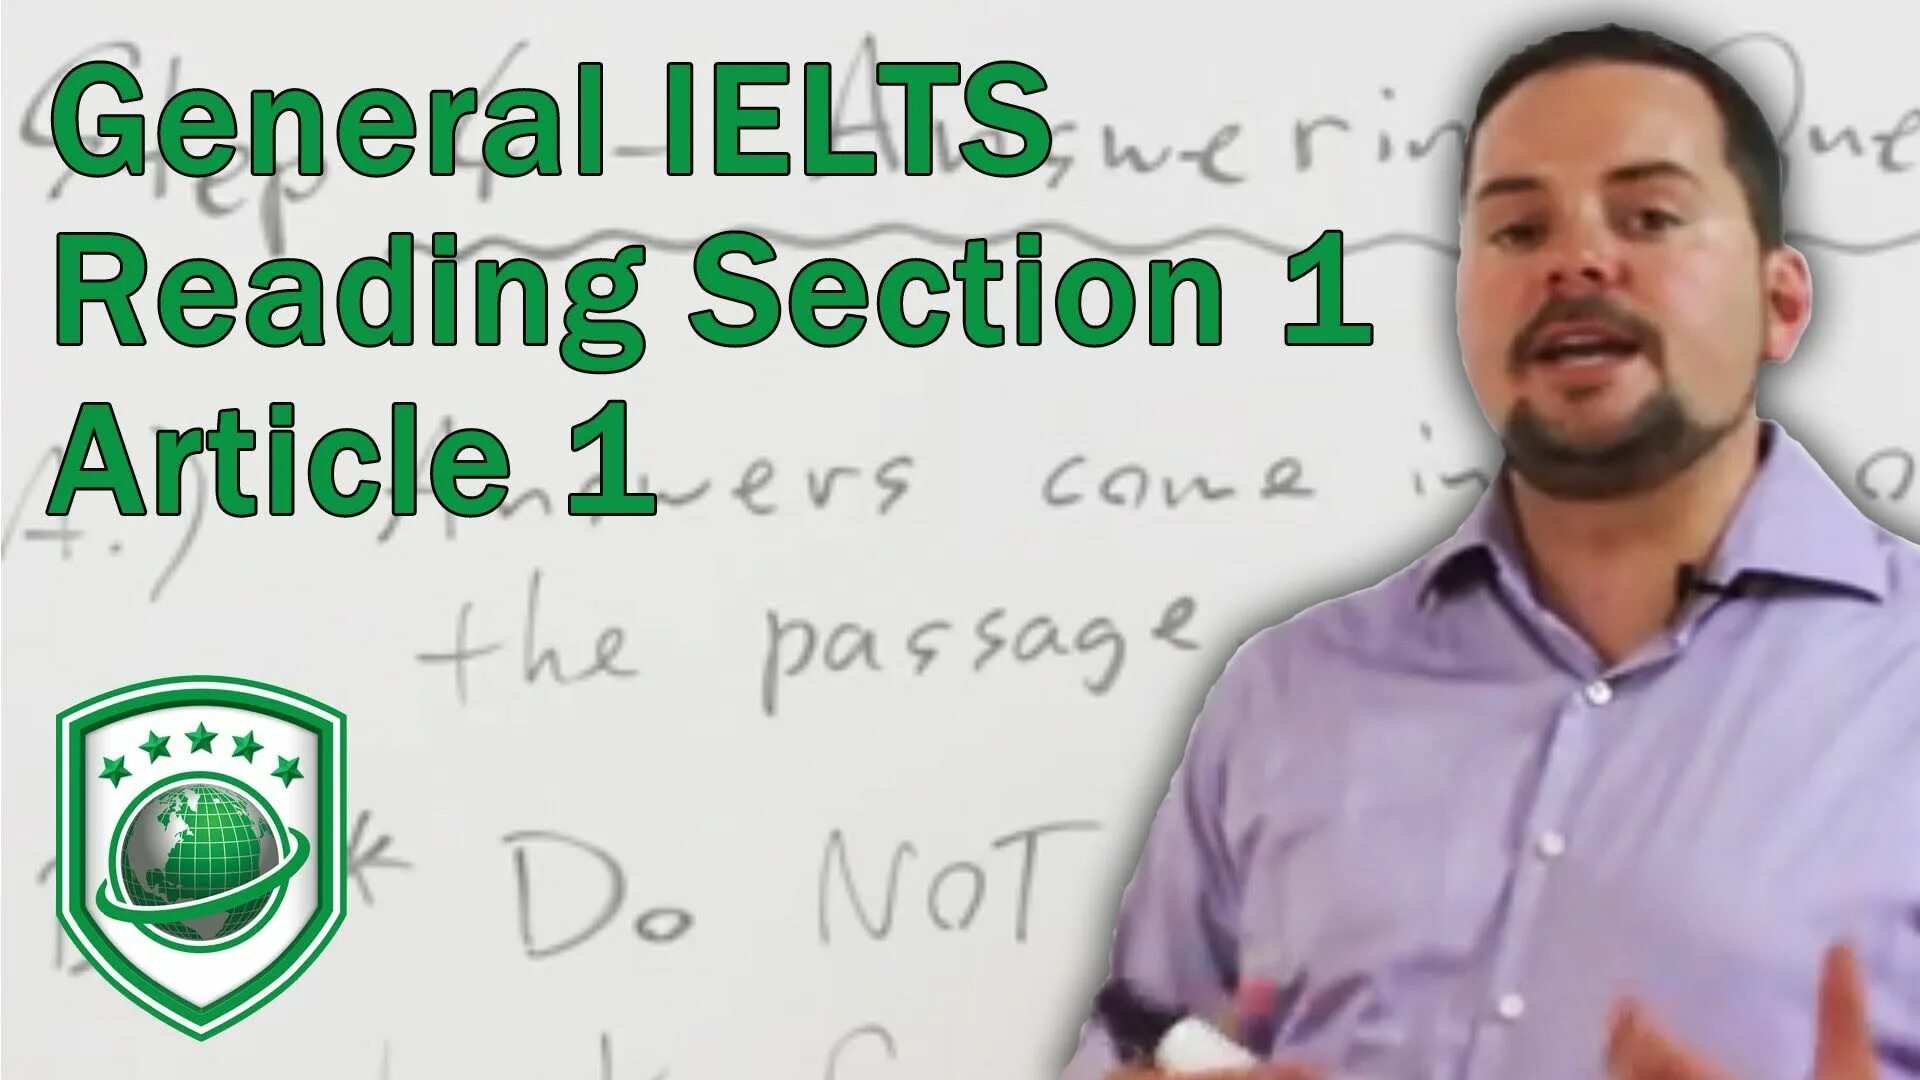 Section 1 reading. IELTS reading Section. IELTS General reading. IELTS Listening Section 1. Reading Section 1.